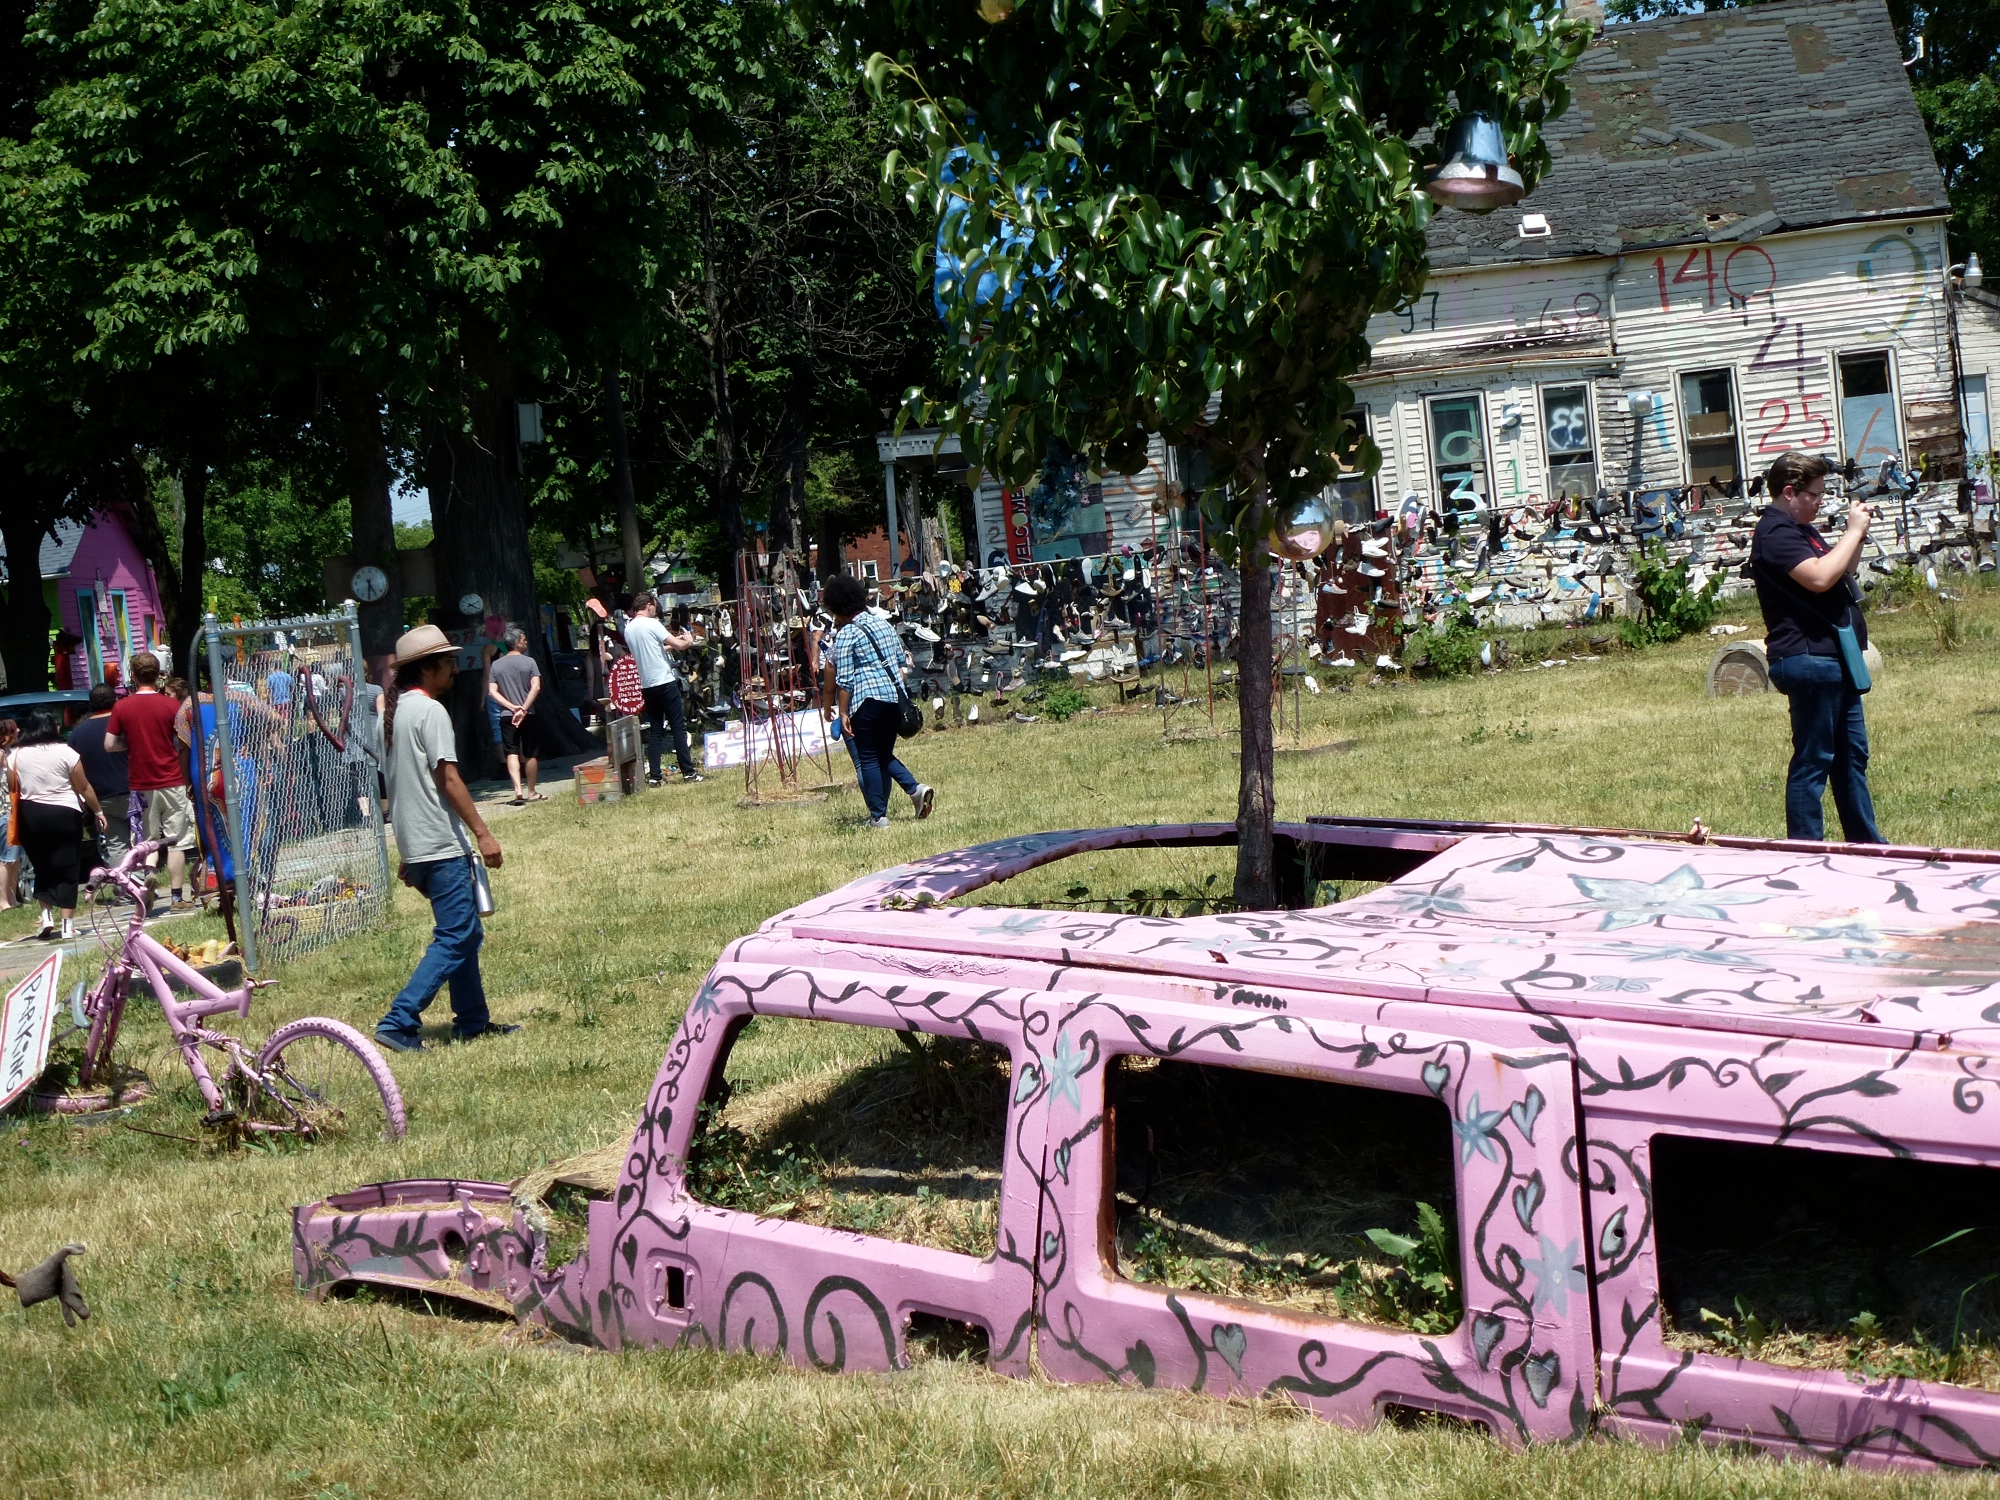 A Hummer appears to be half buried in the ground. Its windowless frame is painted matte pink with vine-like designs. A small tree grows out of its sunroof. In the background are a house, other outdoor art pieces, and people of various races and genders looking at them.